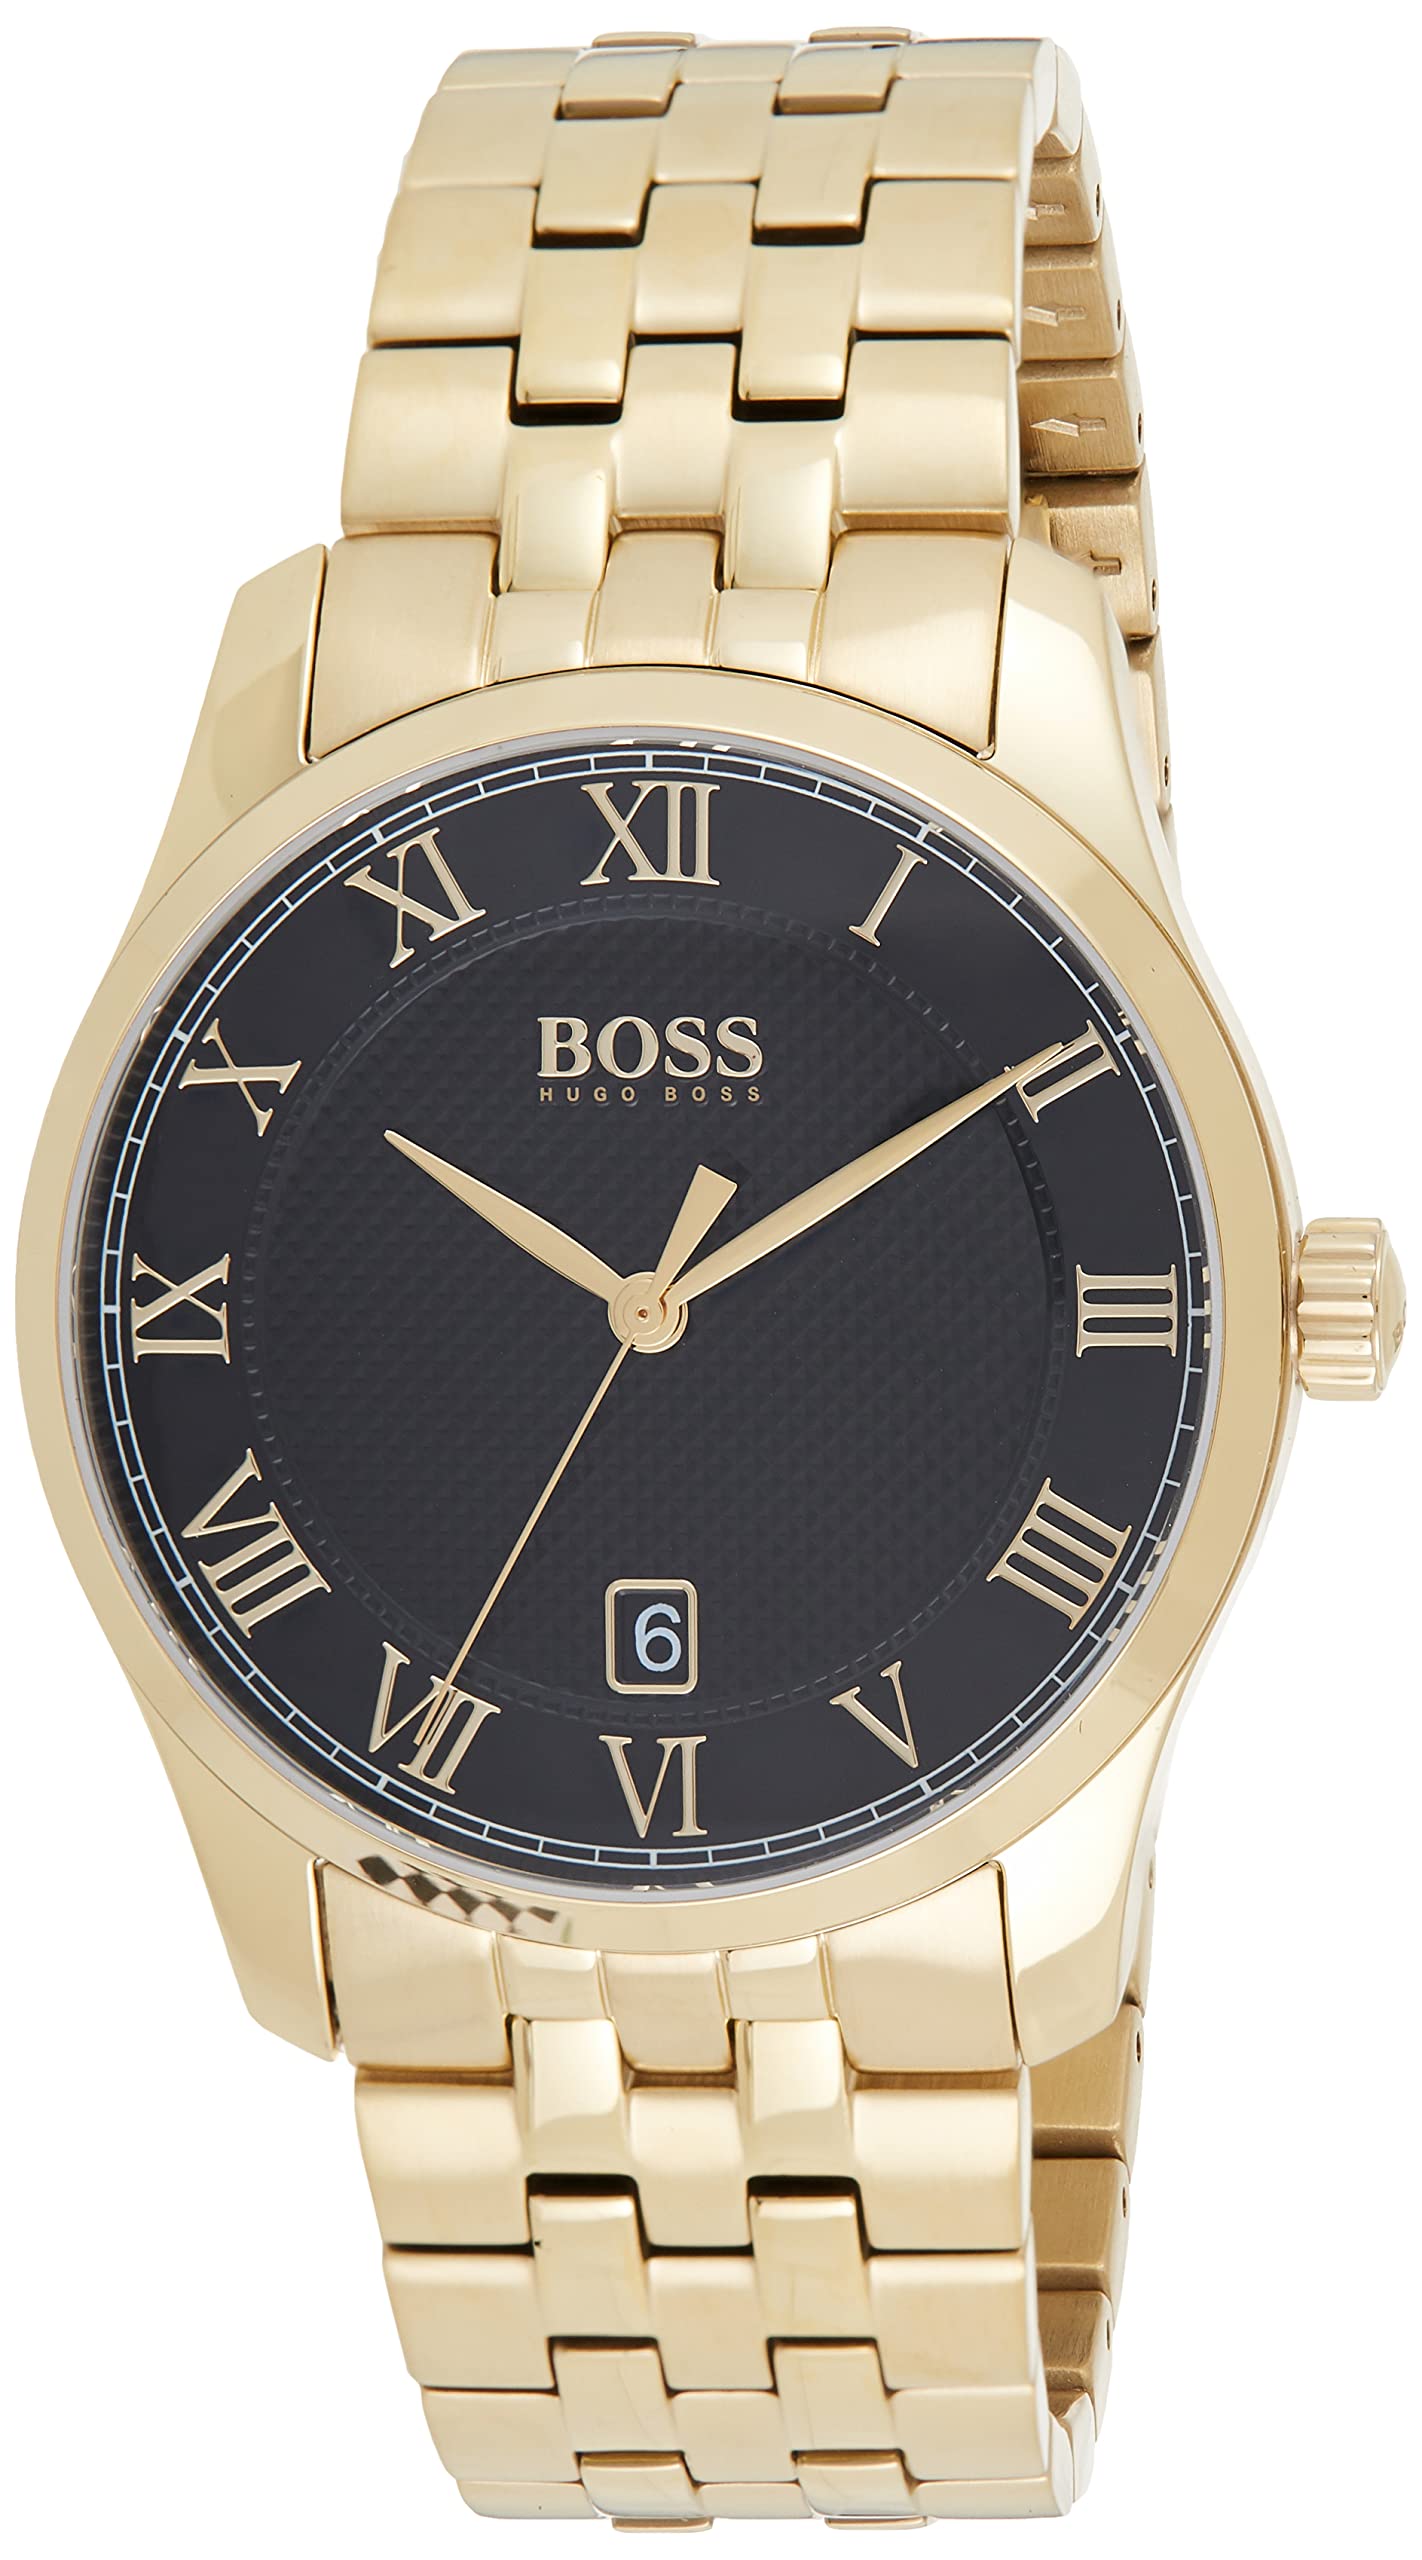 BOSS Men's Analogue Quartz Watch with Gold Plated Strap 1513739